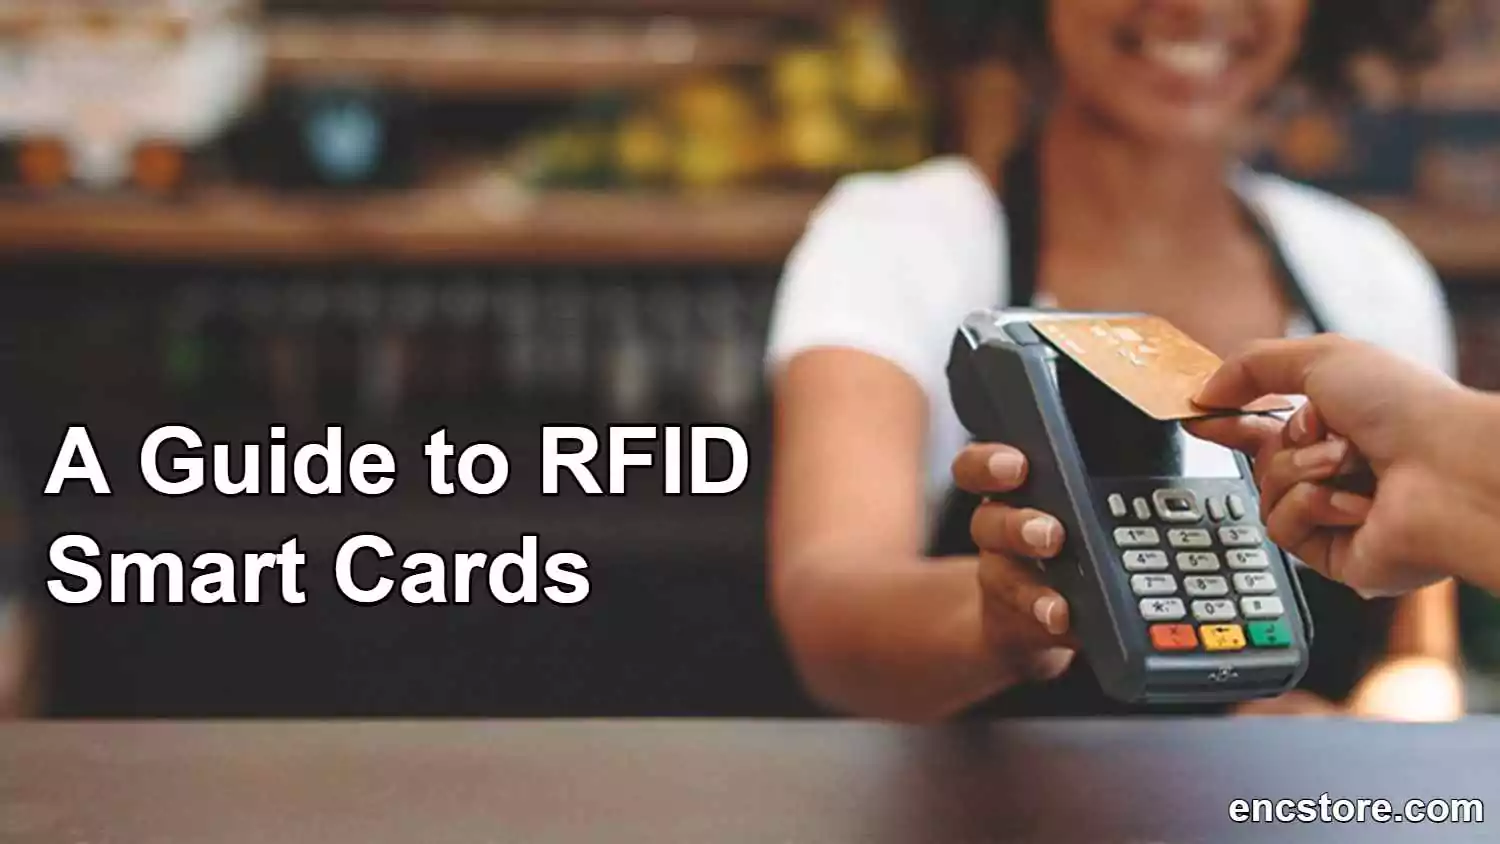 A Guide to RFID Smart Cards